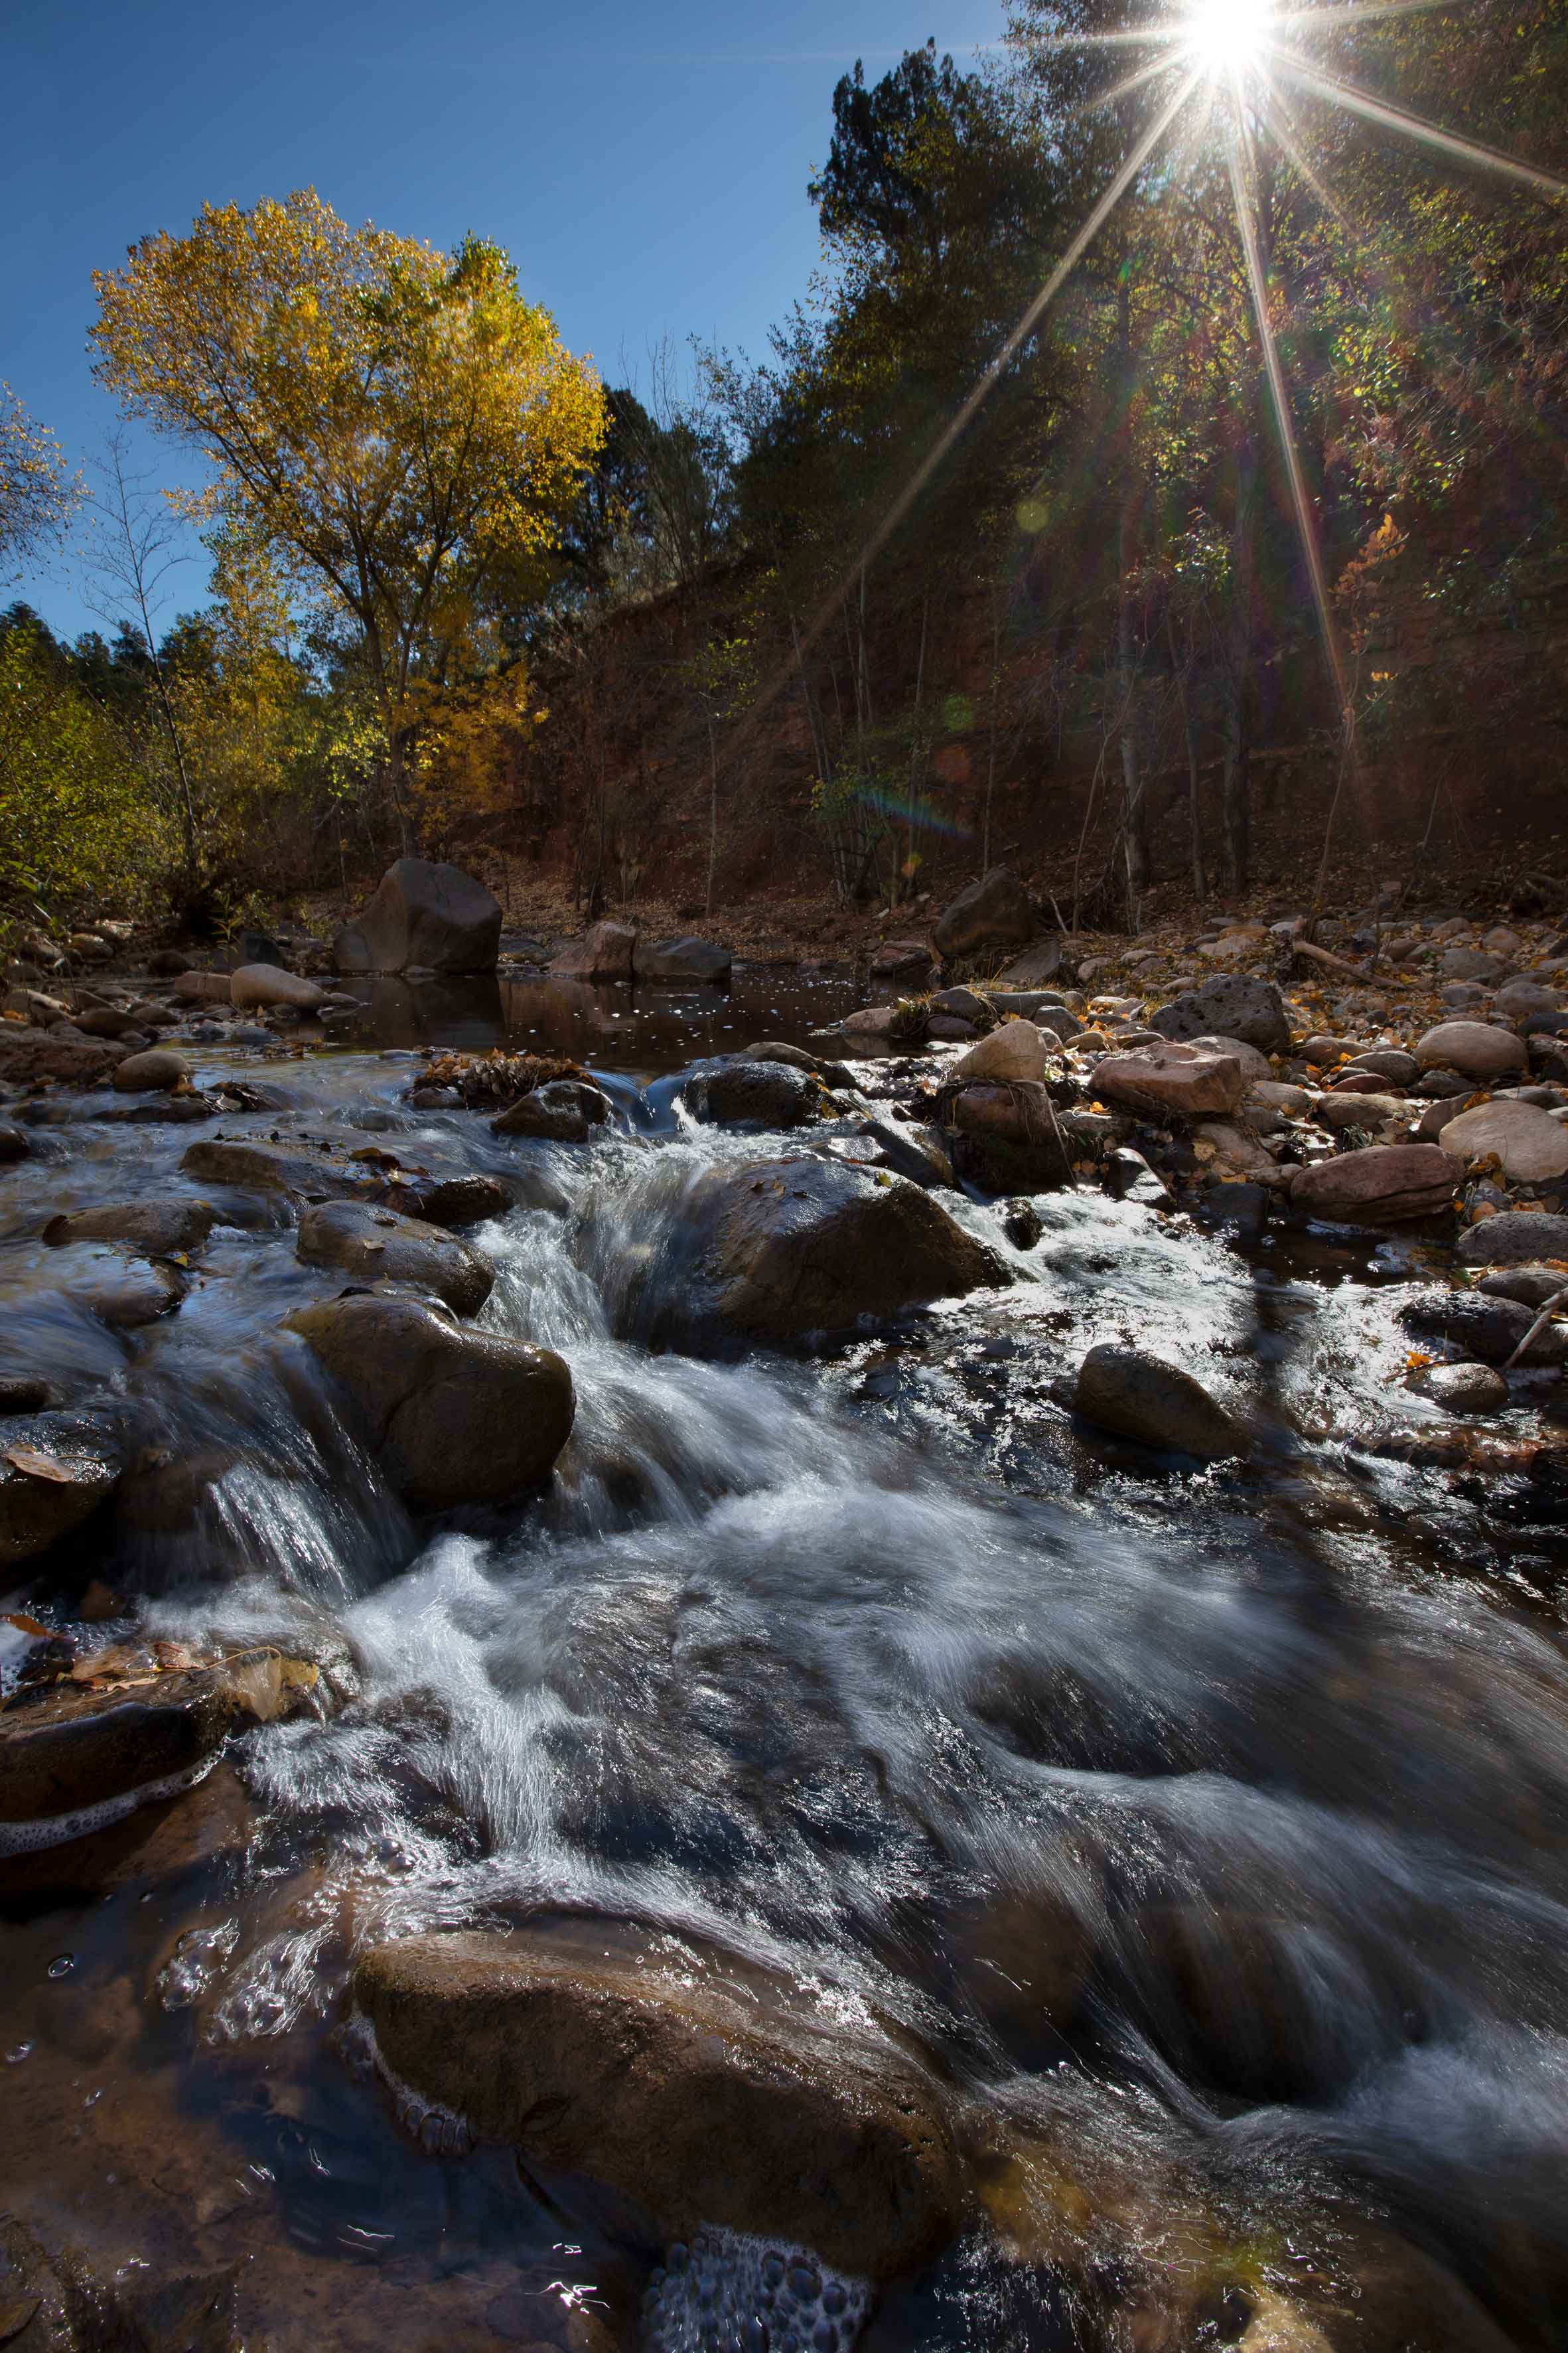 Autumn at Corduroy Creek on the Fort Apache Reservation in eastern Arizona